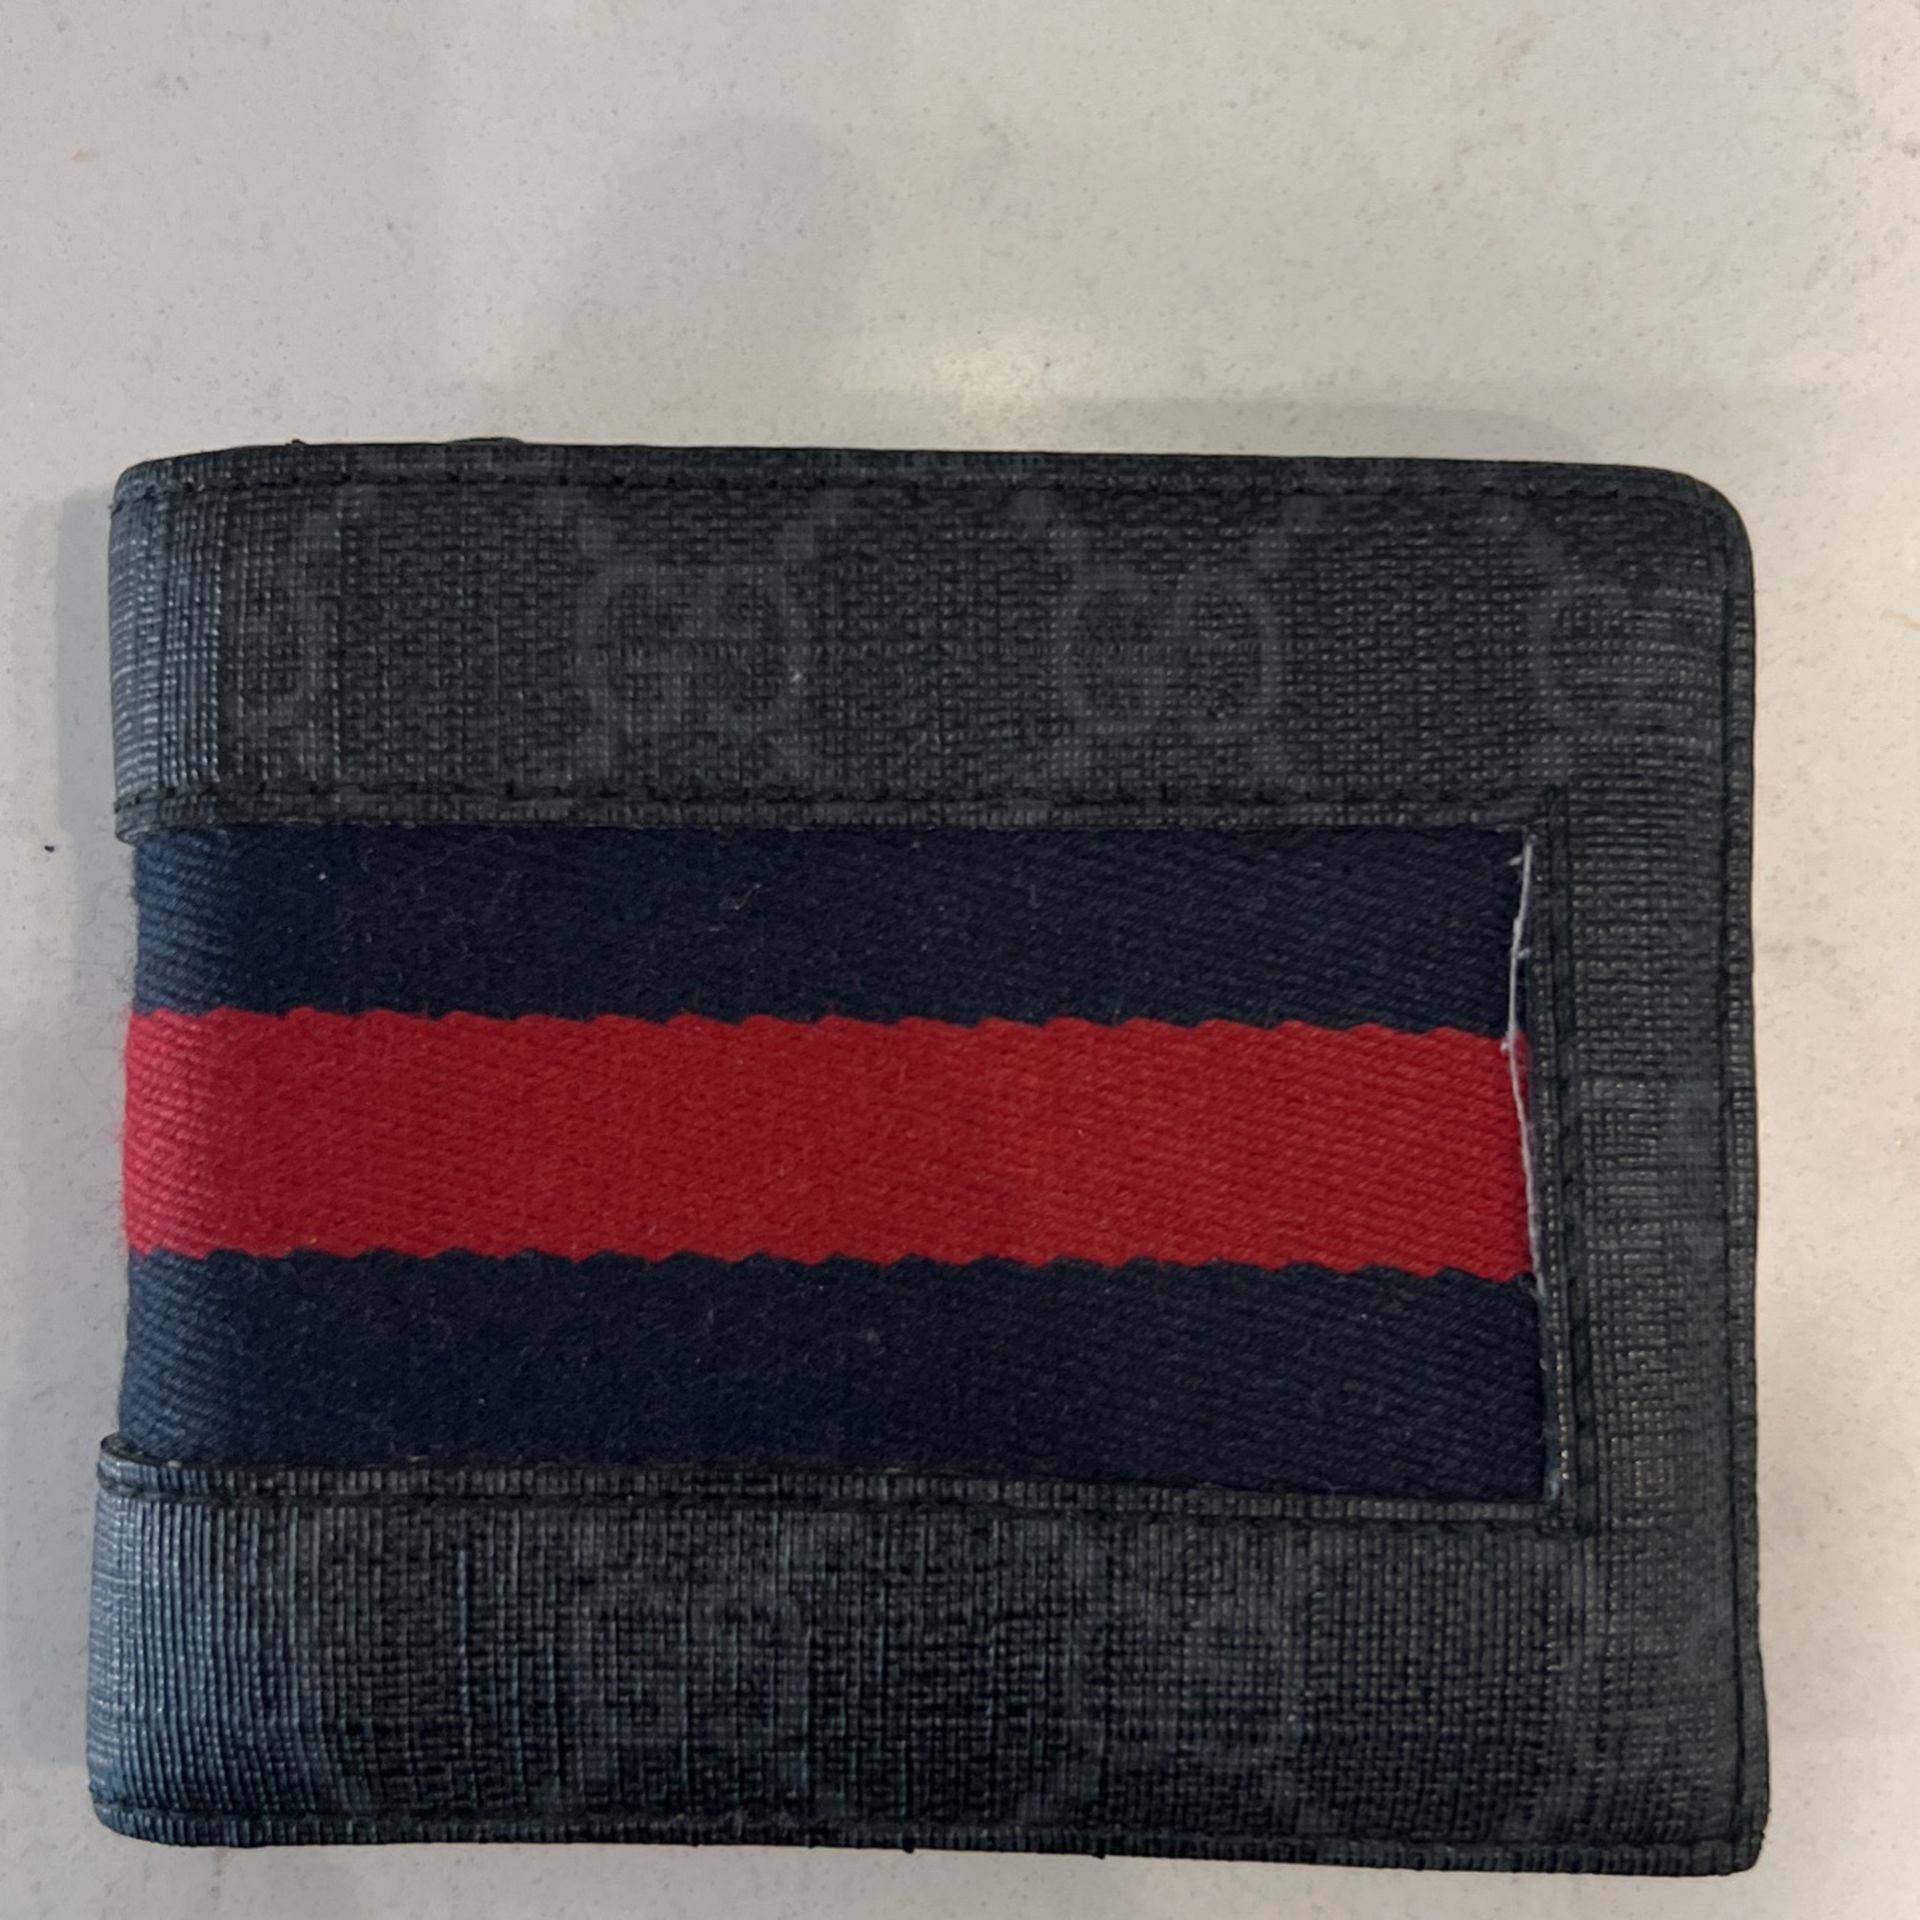 Authentic Gucci Wallet Good Condition